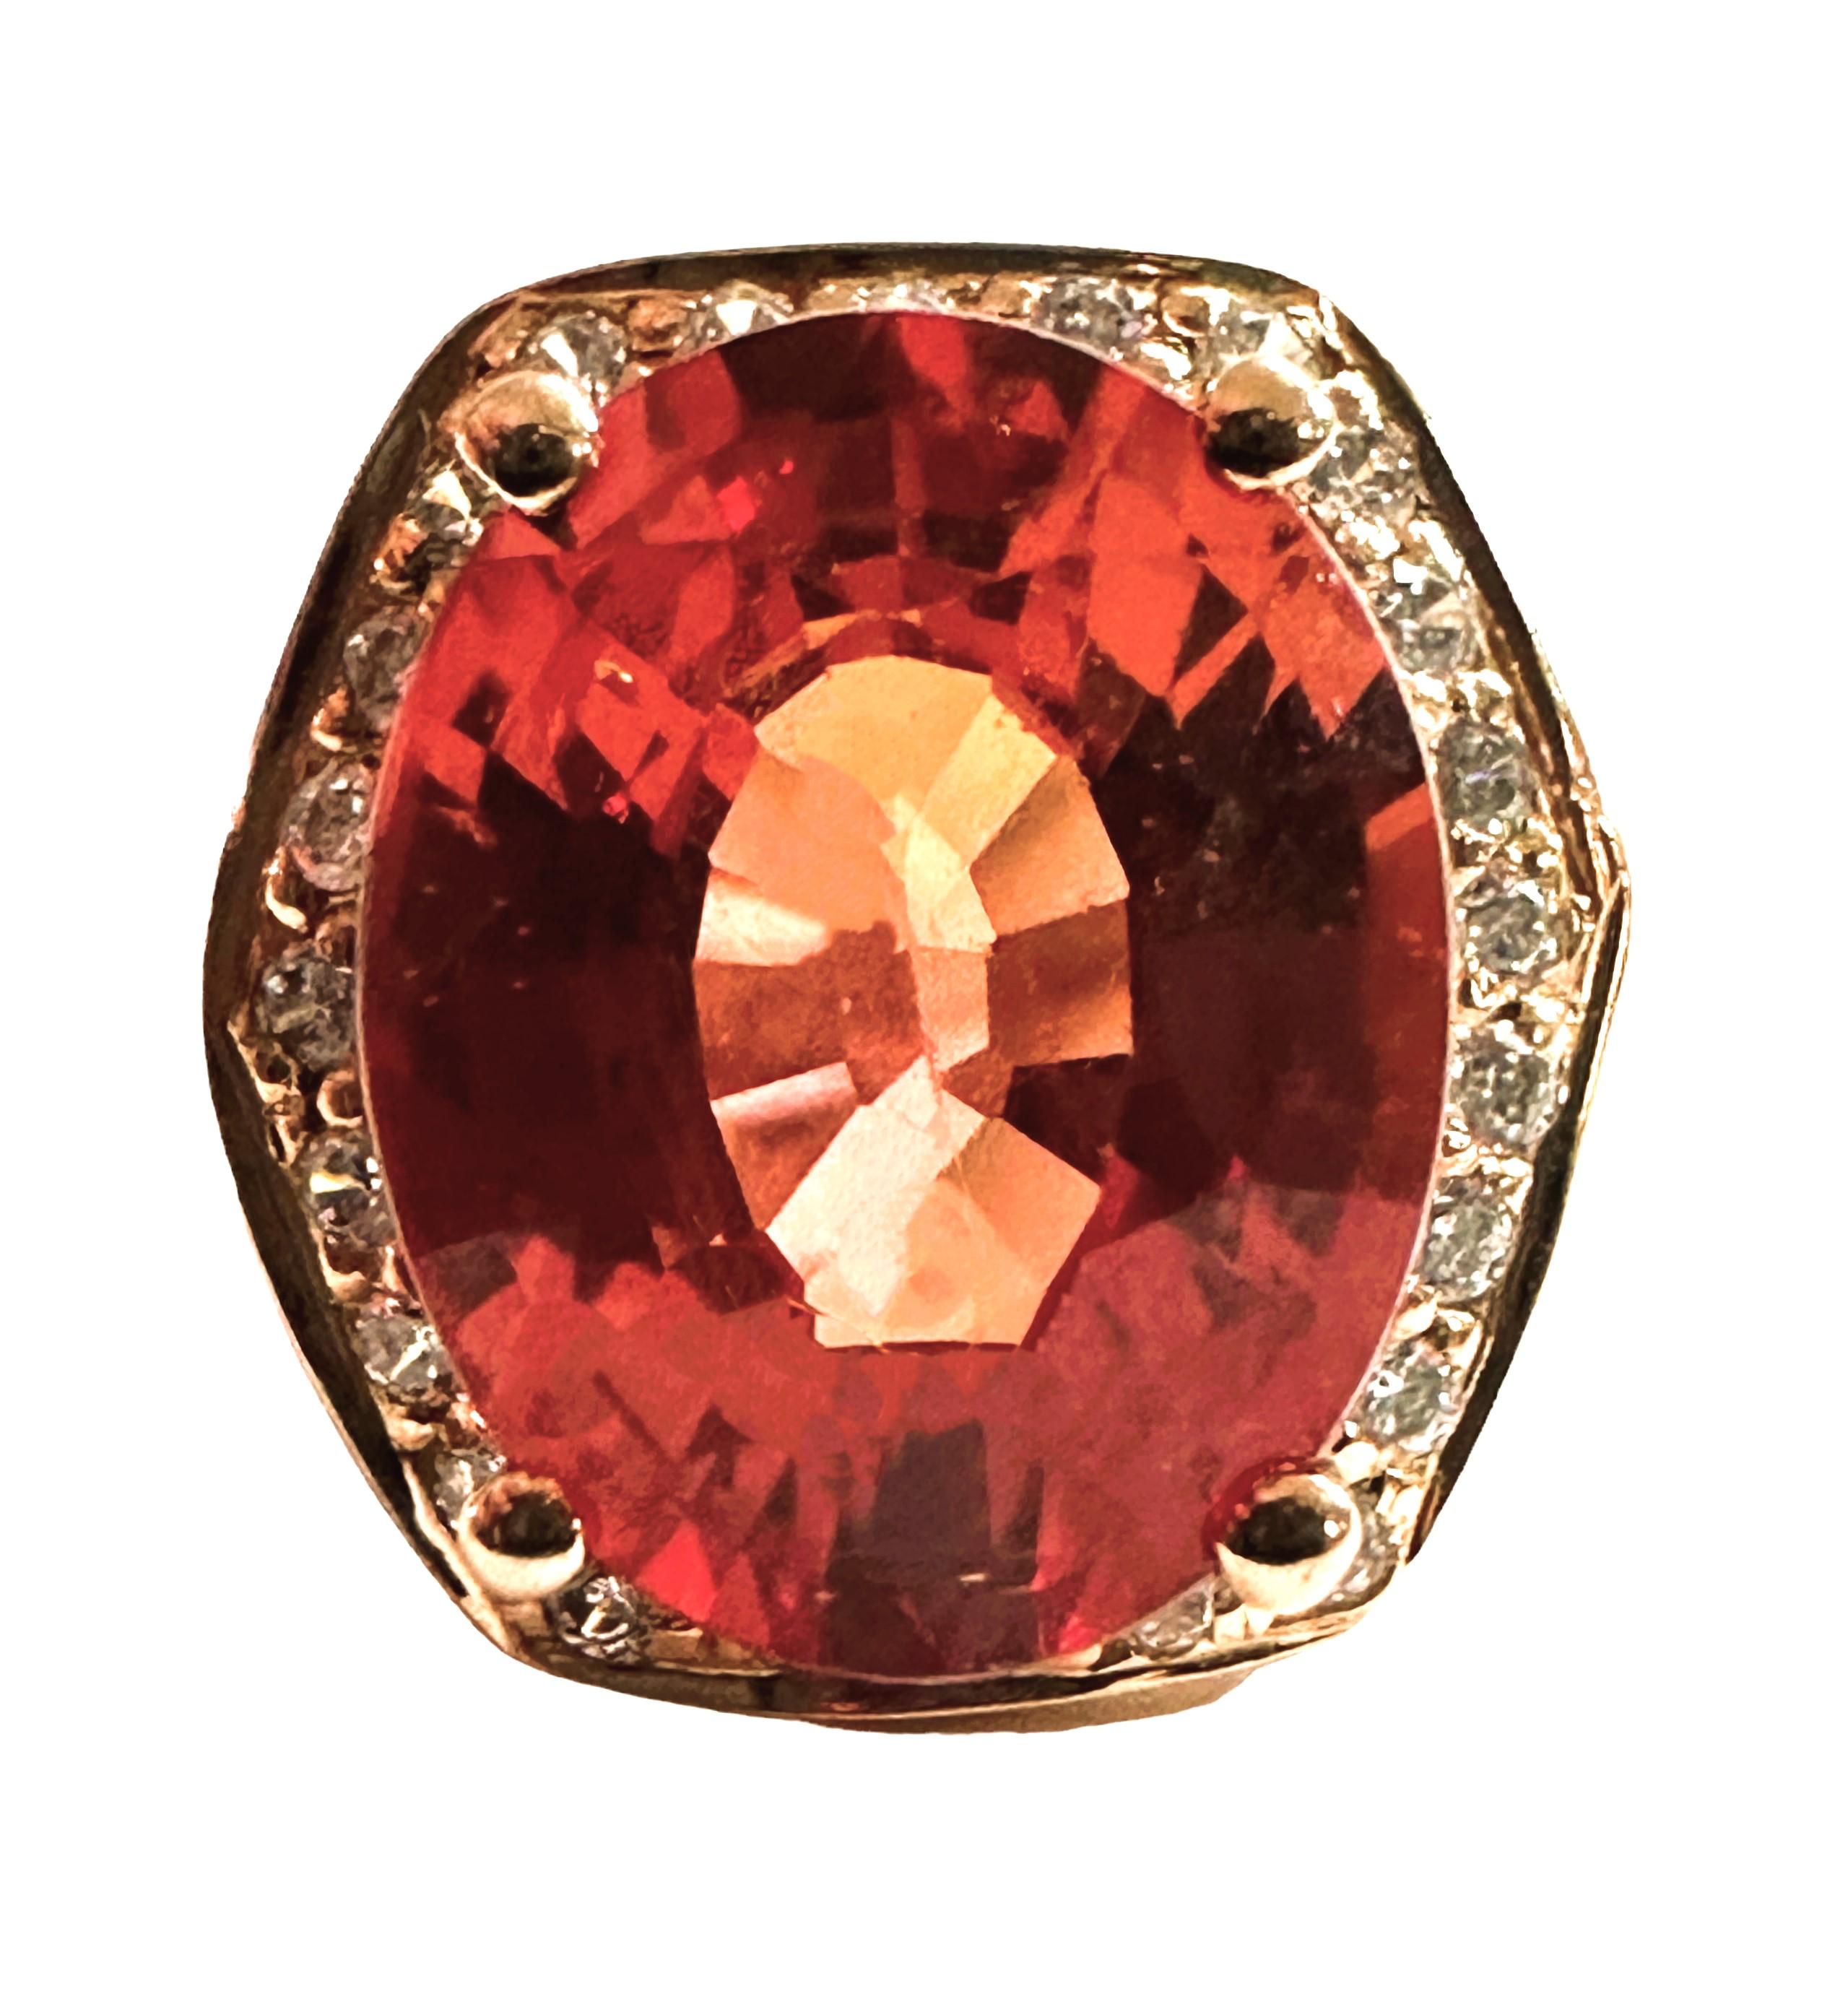 I just love the beautiful colors this ring has! The ring is a size 6.   It is from Africa and is just exquisite.  The 